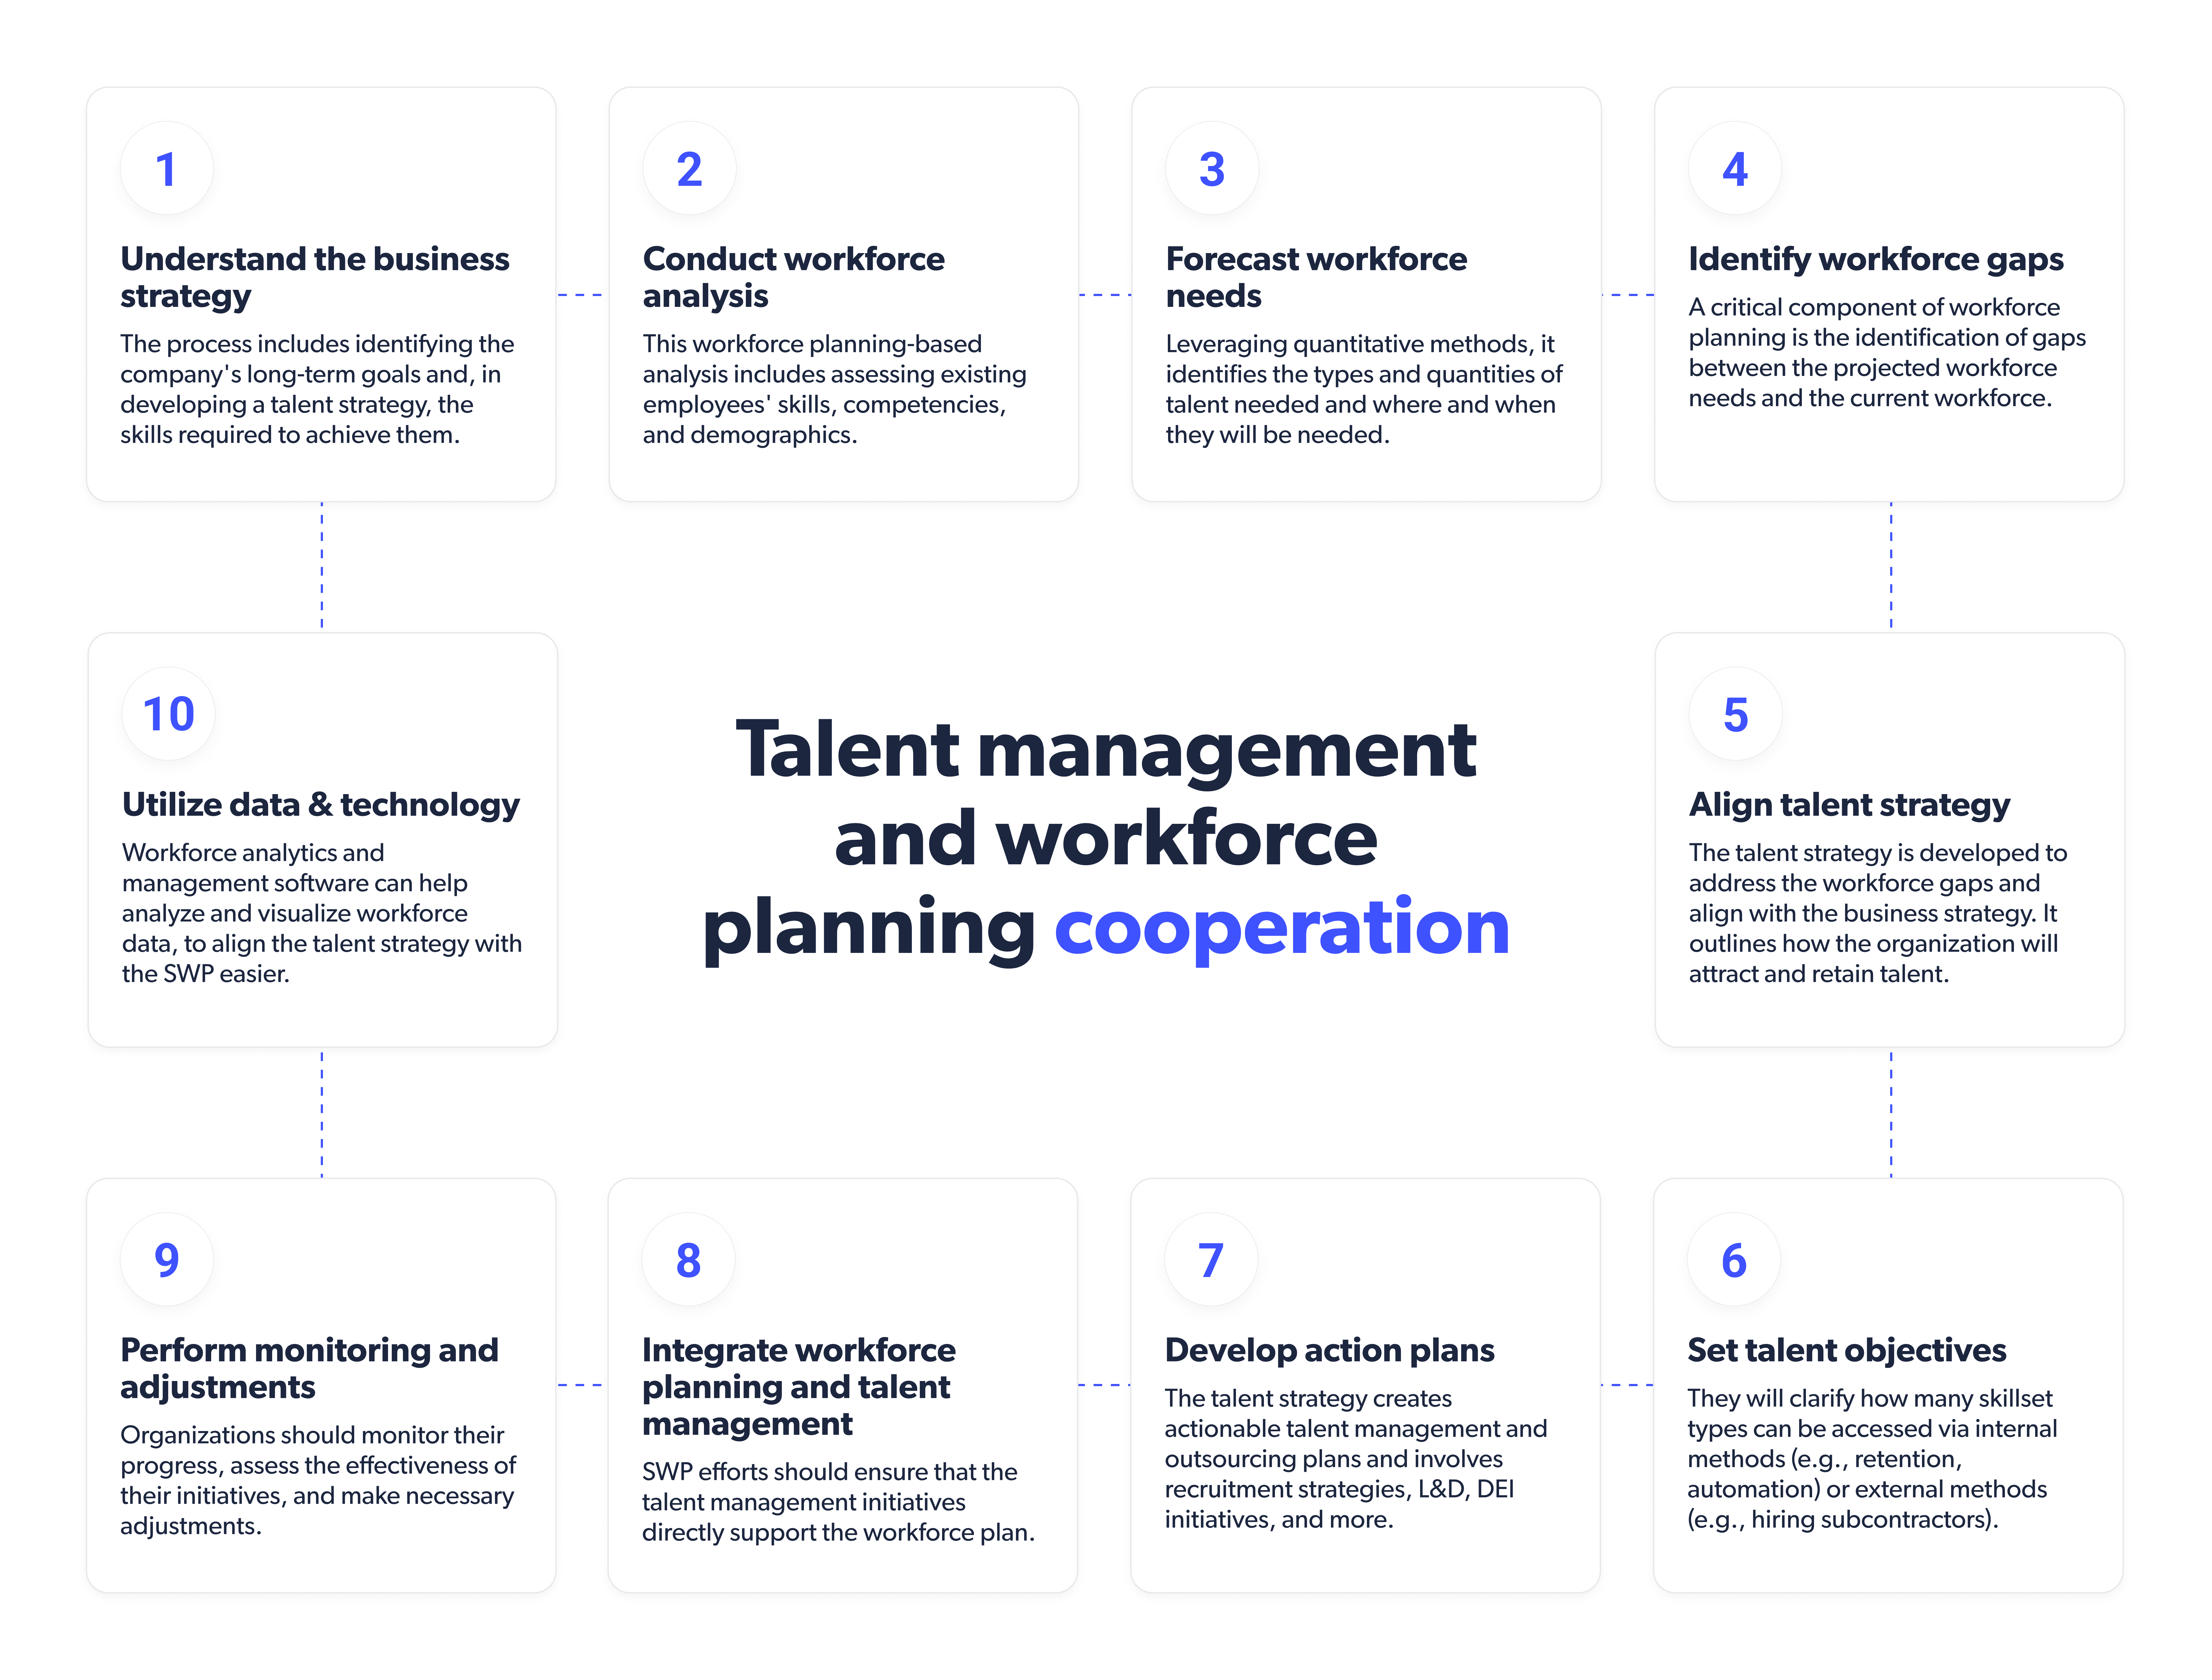 Talent management and workforce planning cooperation